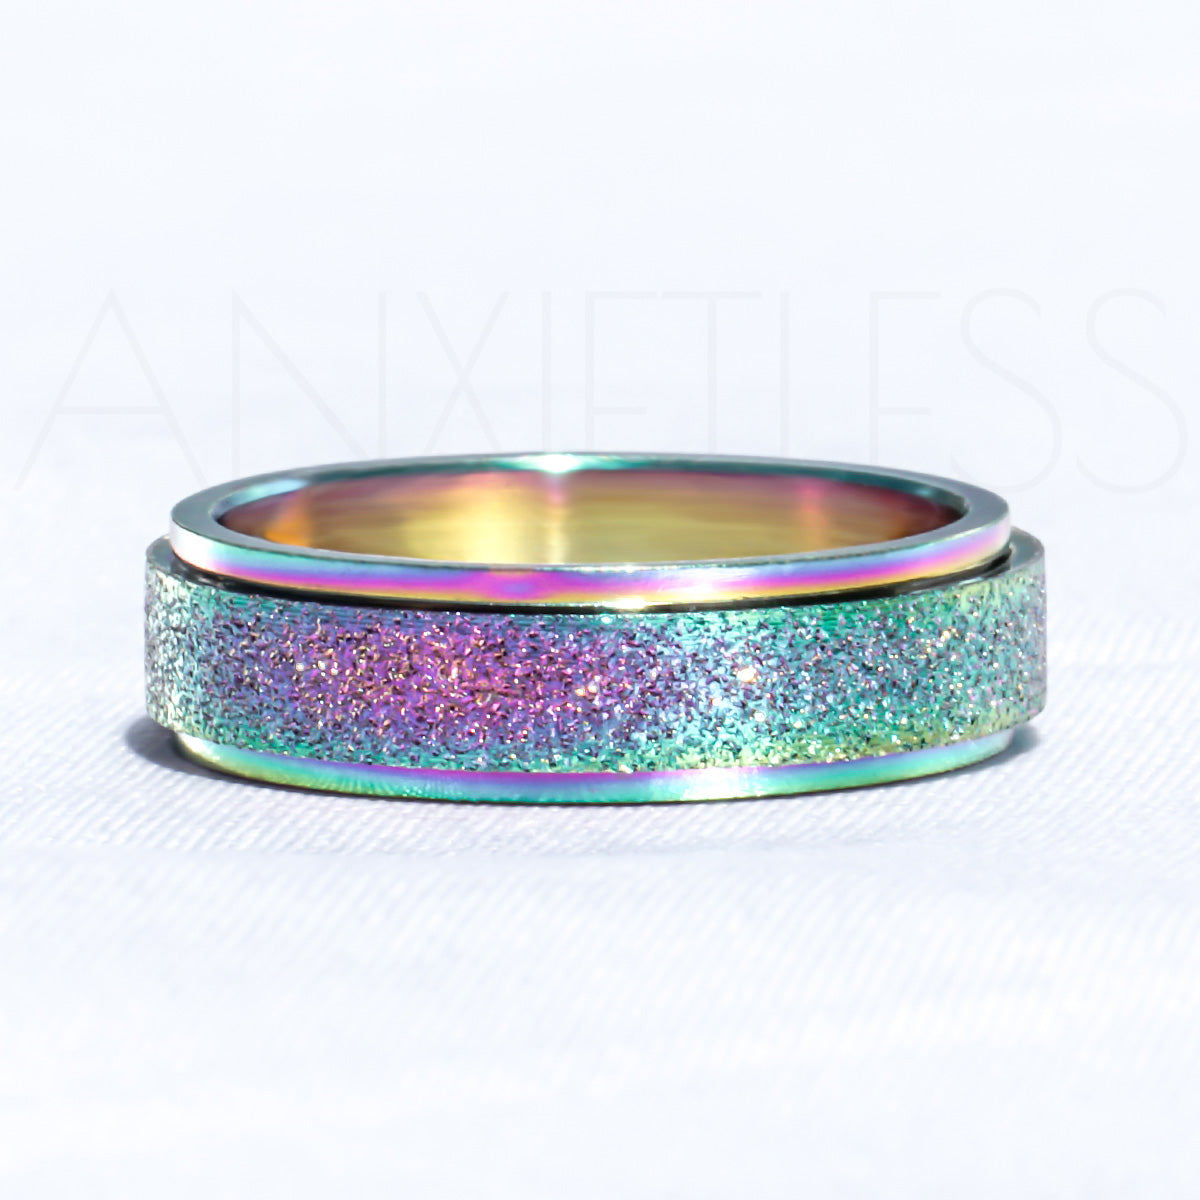 Sparkly Rainbow Anxiety Ring Laid Flat on White Background